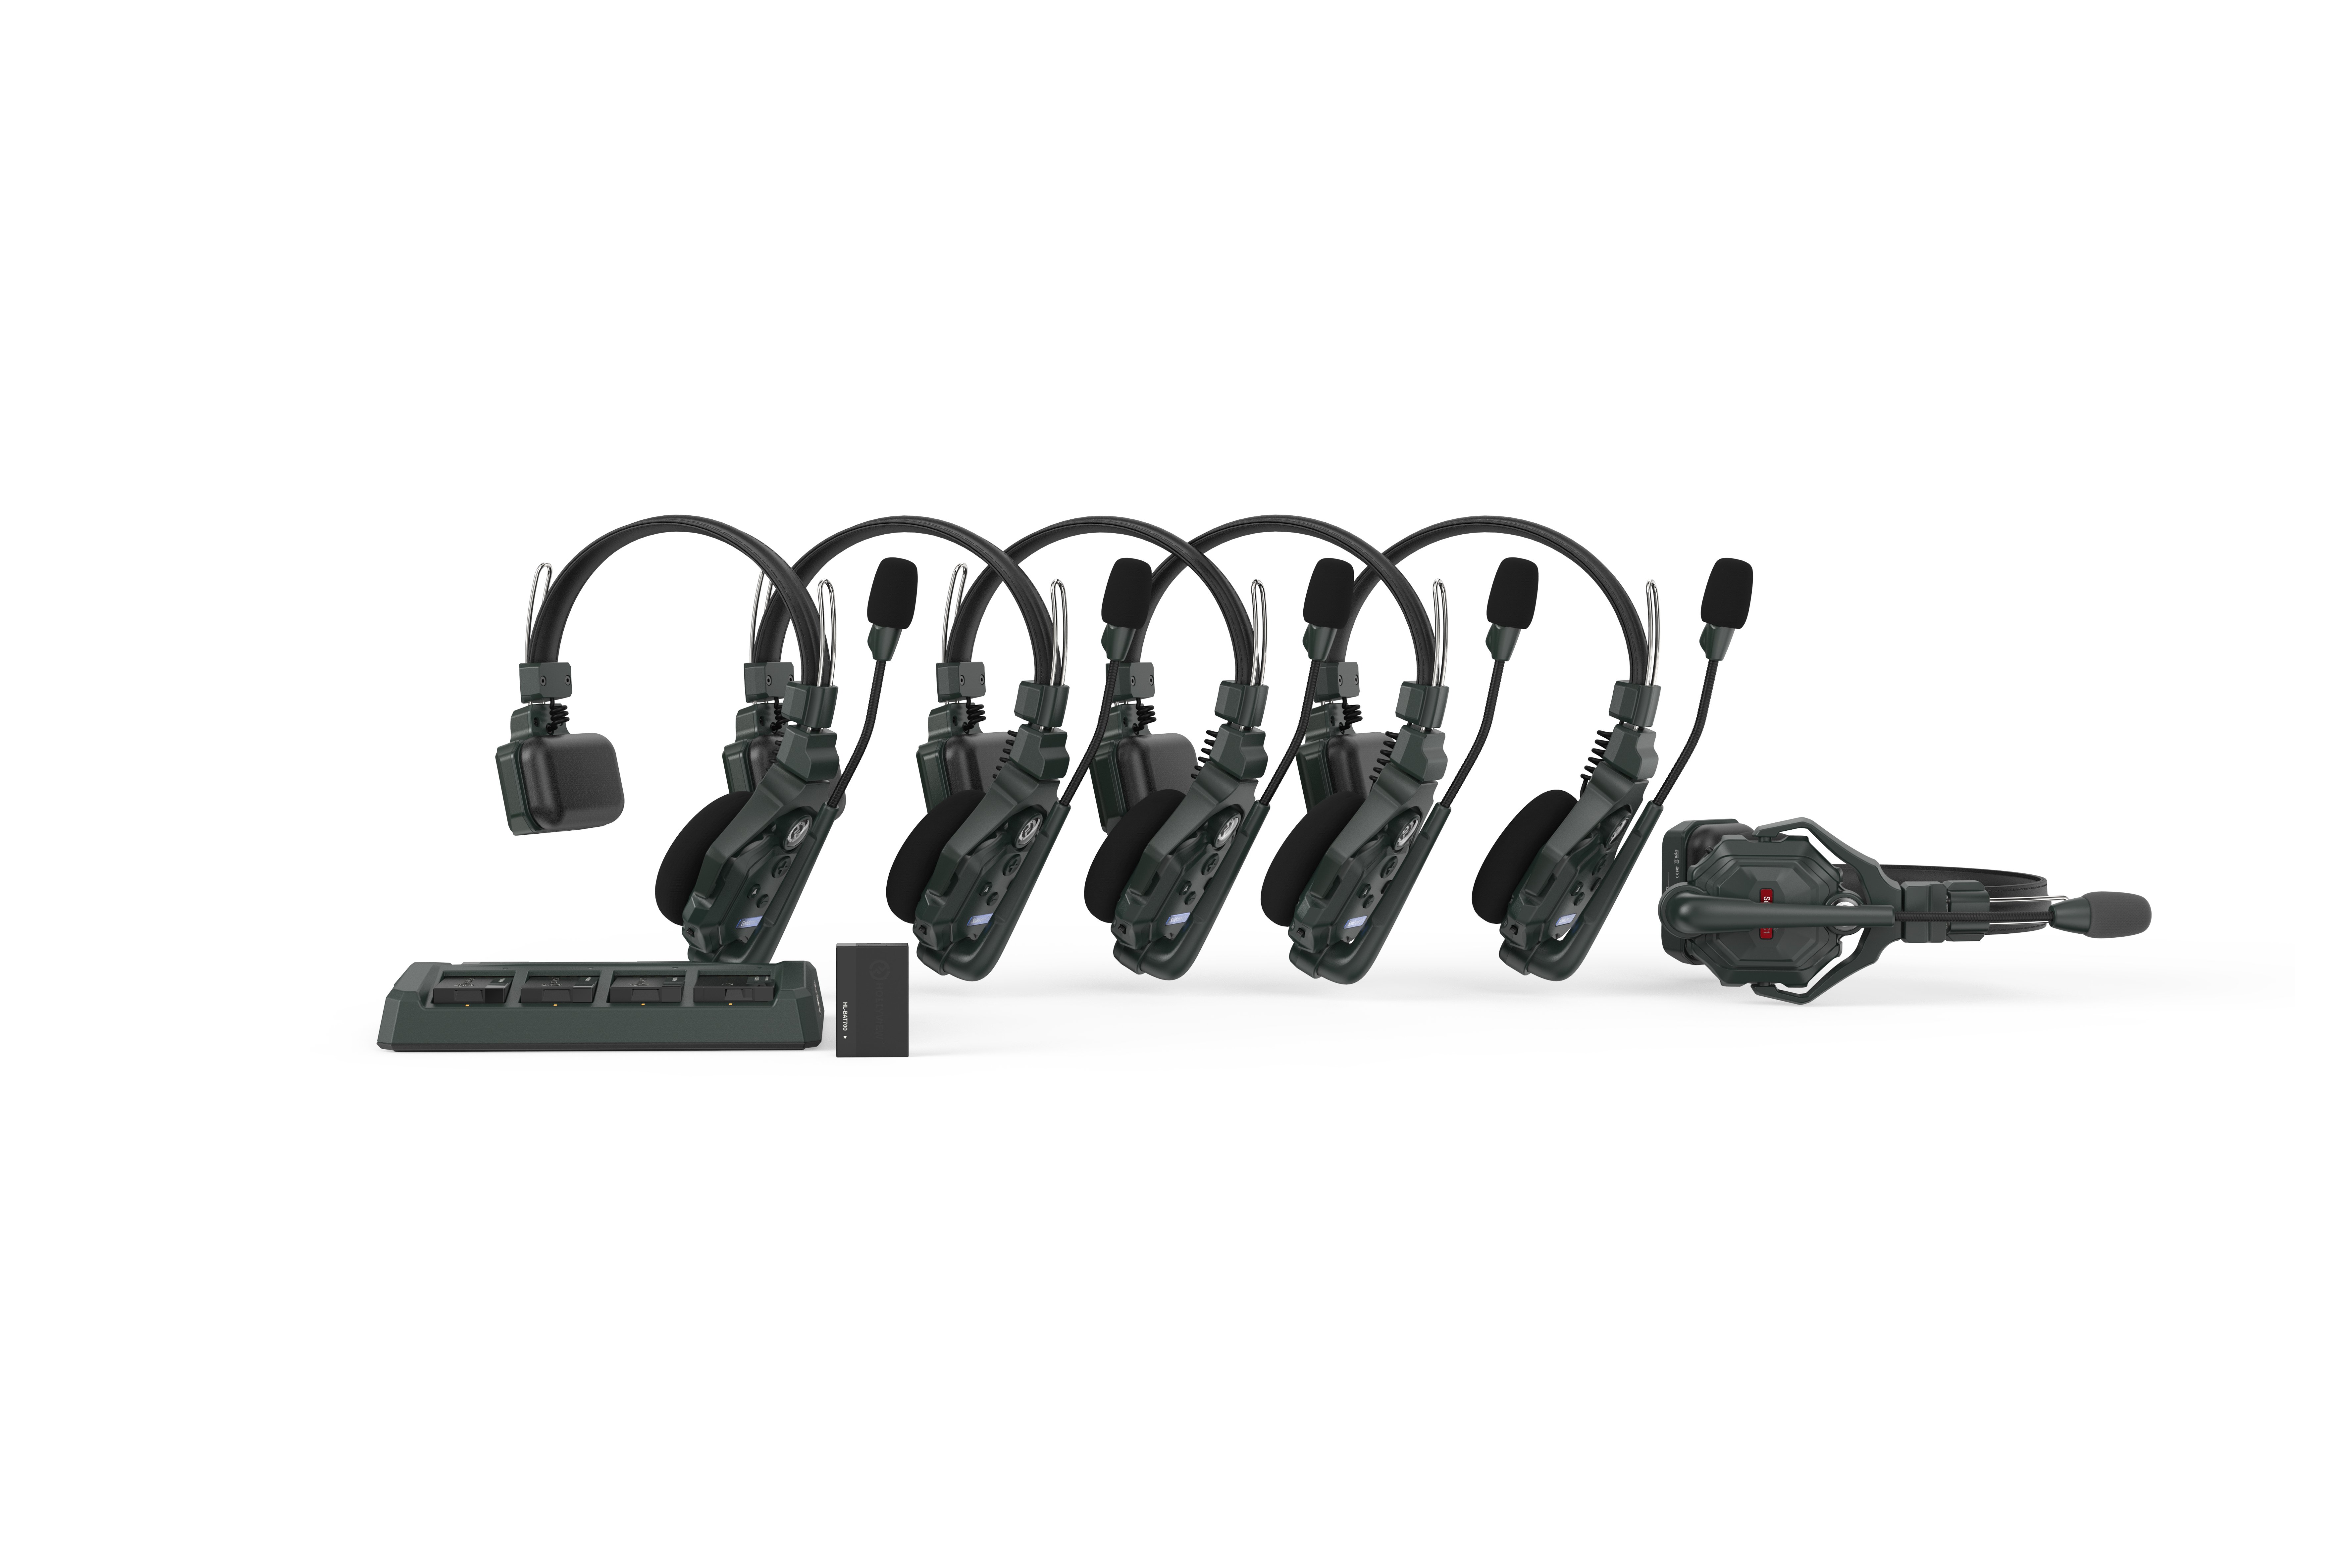 Hollyland Solidcom C1-6S Full Duplex Wireless Intercom System With  Headsets Full Compass Systems